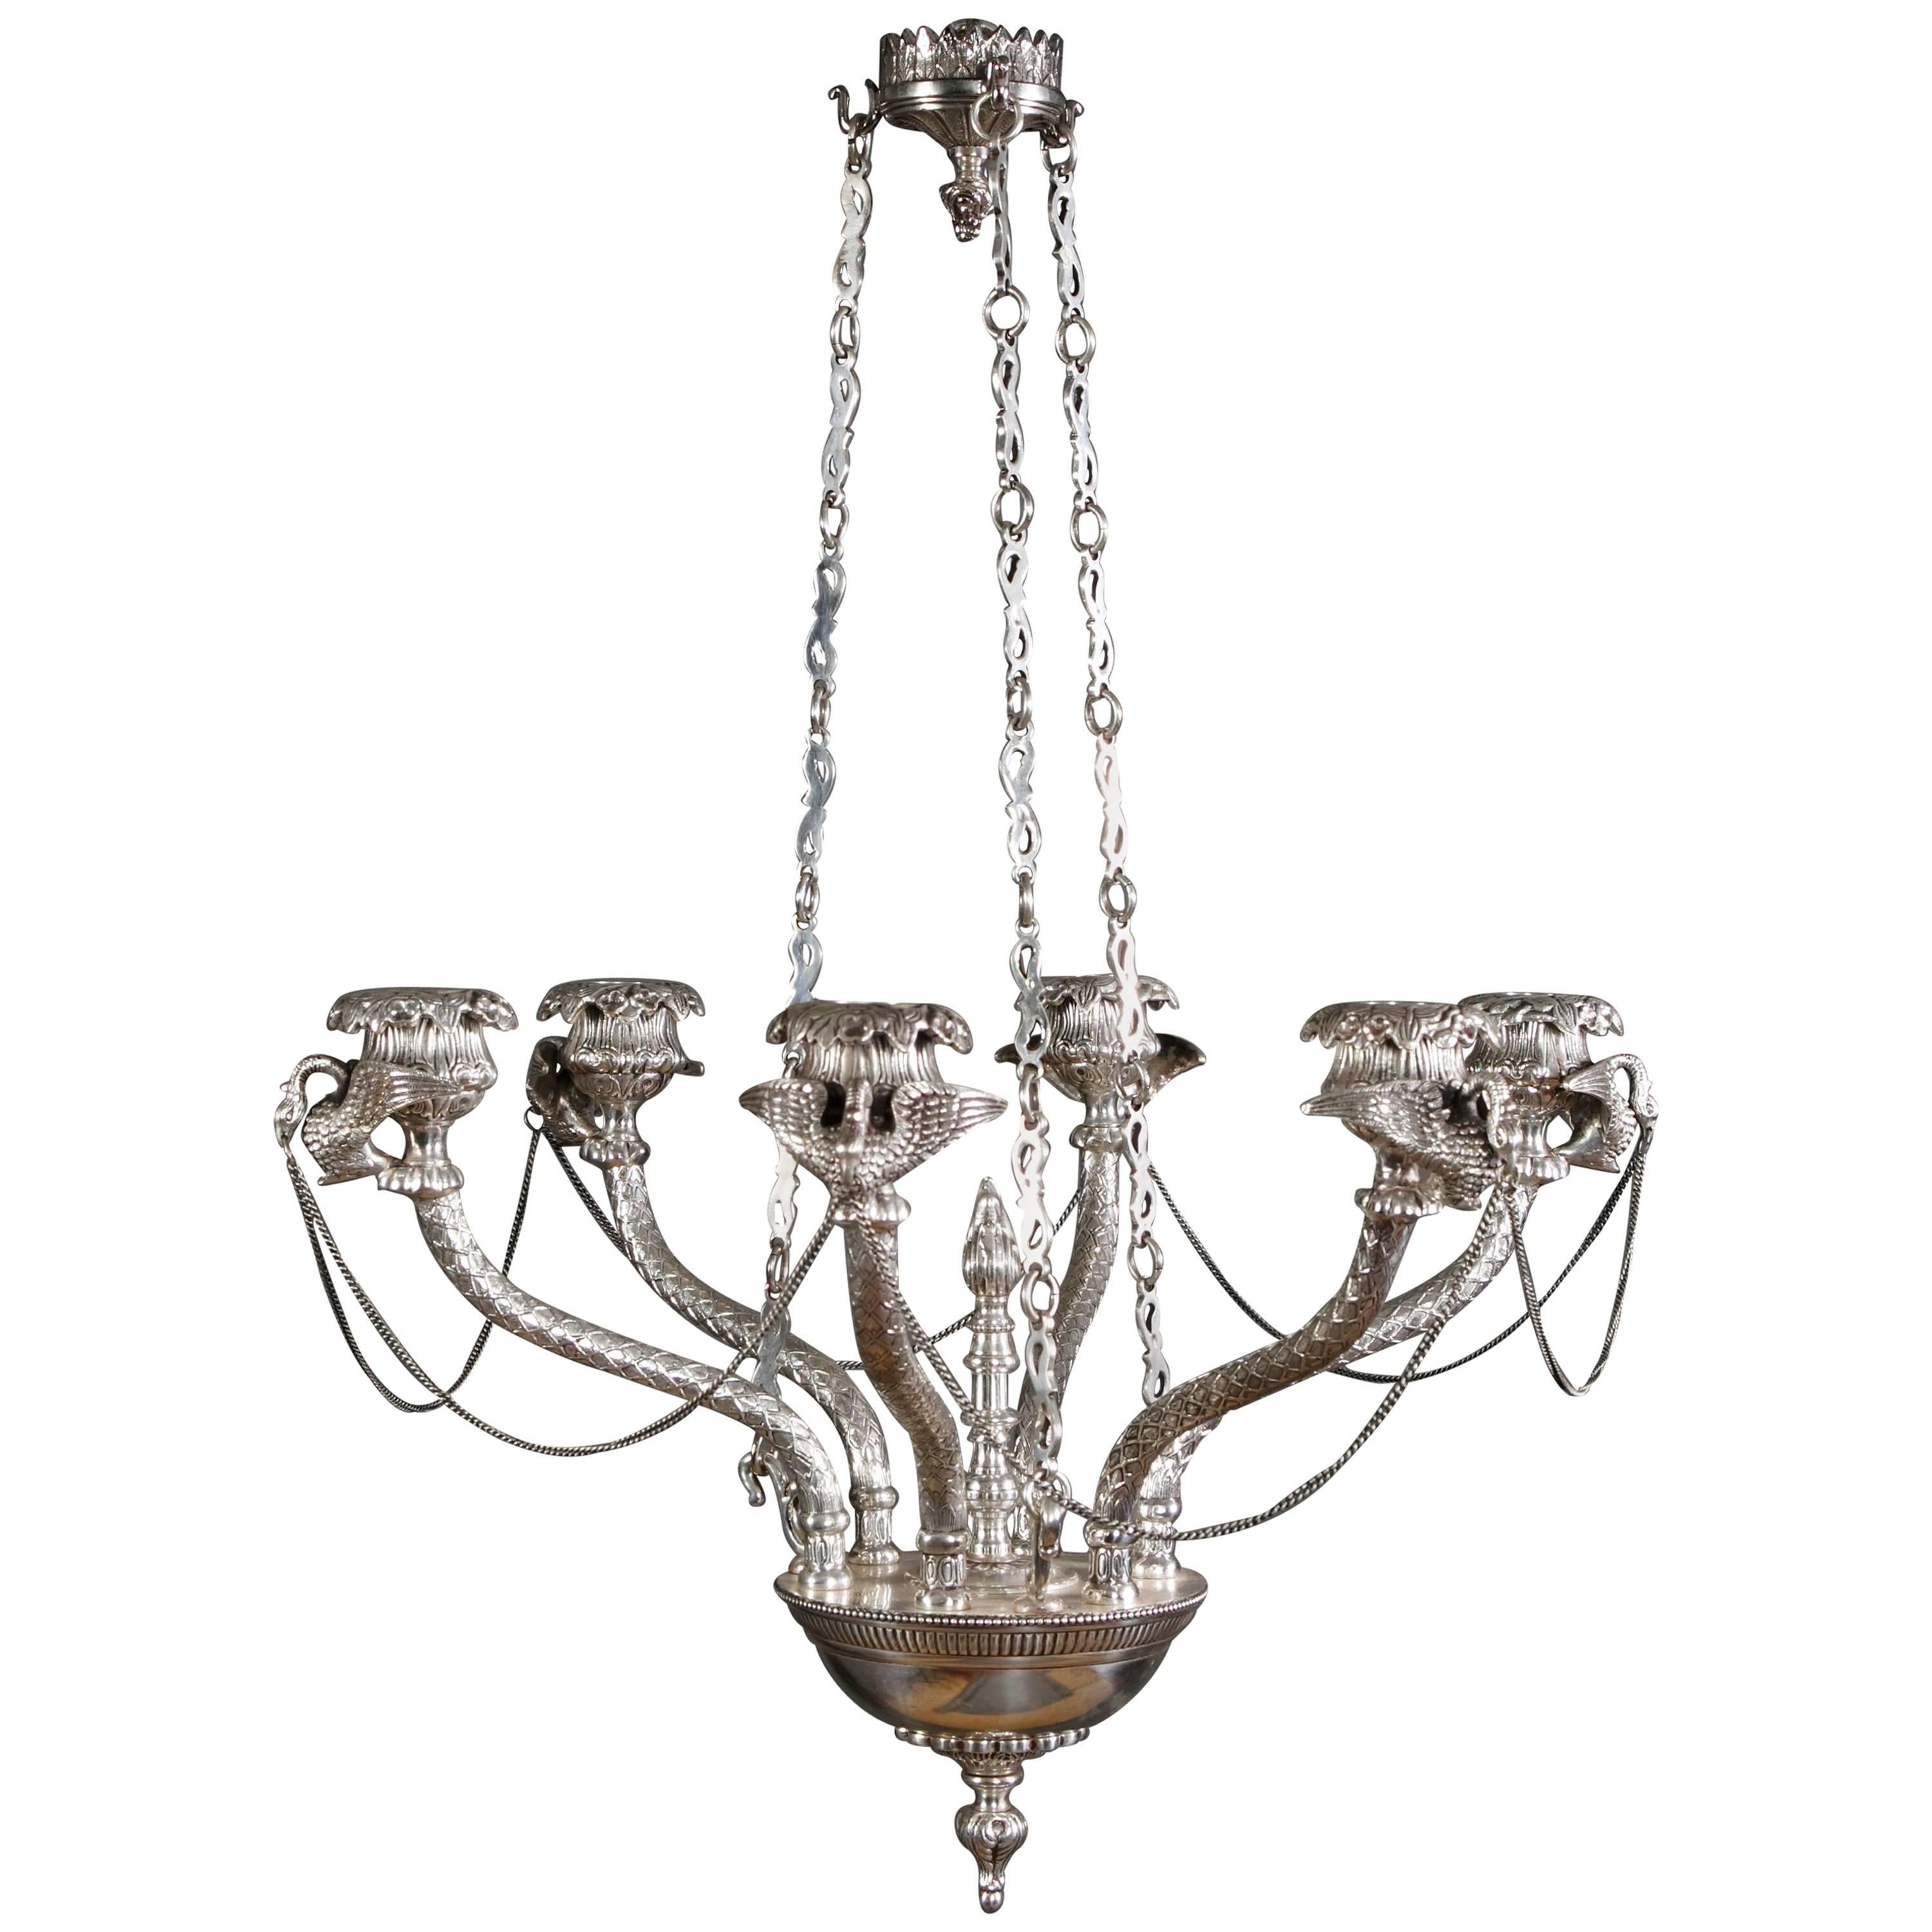 20th Century, Empire Style Silvered Ceiling Candelabra